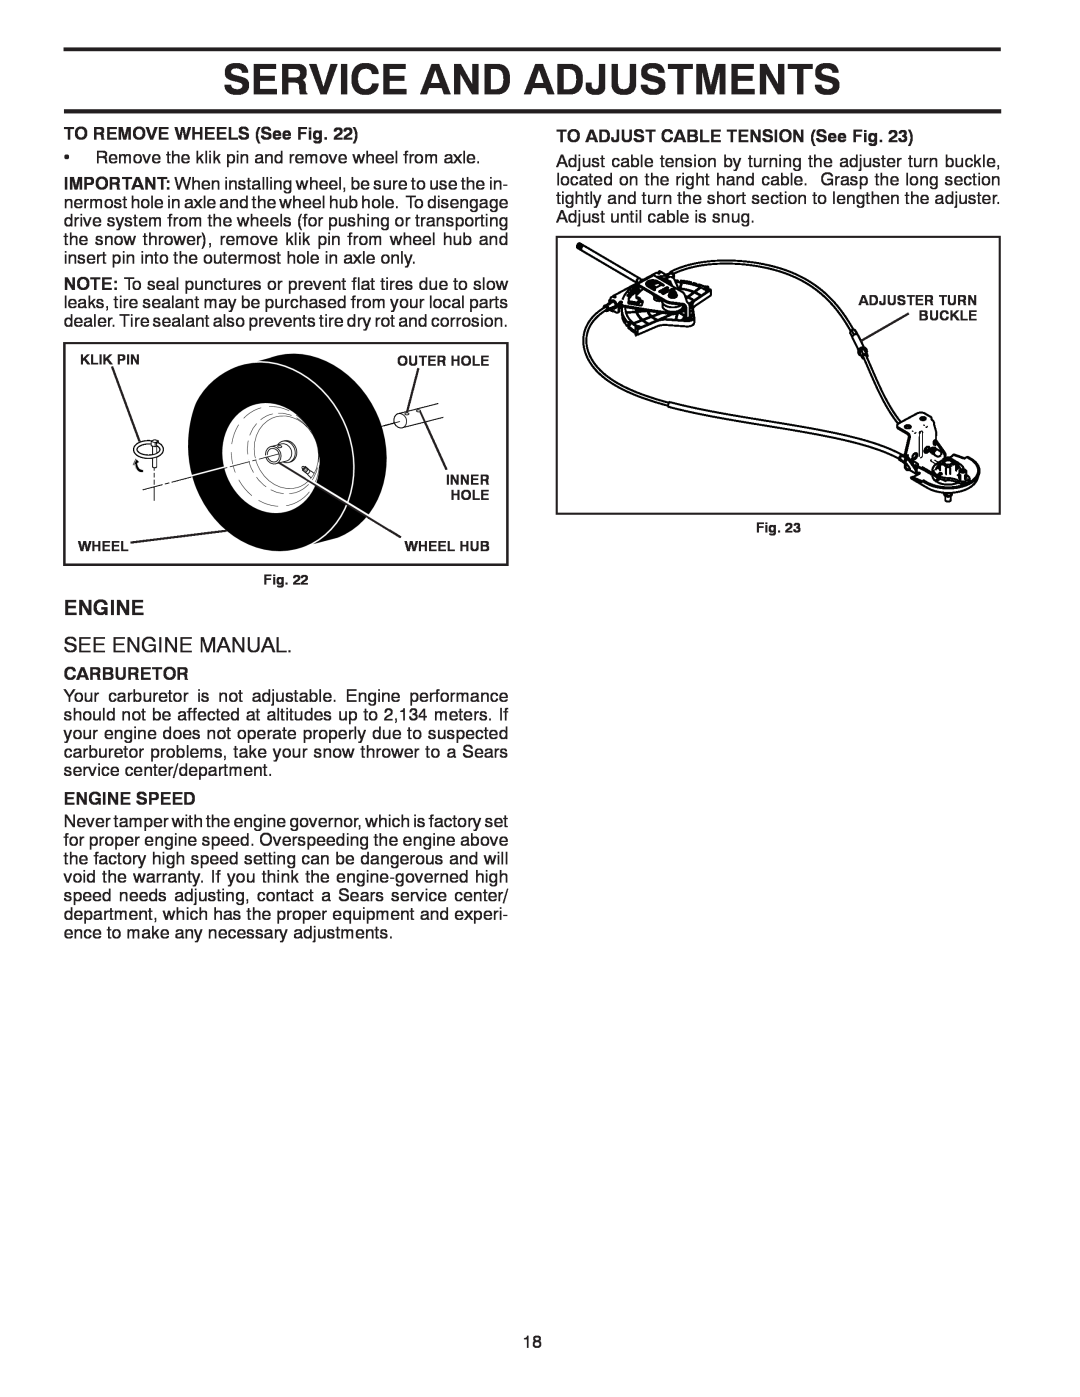 Poulan 437390, 96198003601 See Engine Manual, Service And Adjustments, TO REMOVE WHEELS See Fig, Carburetor, Engine Speed 